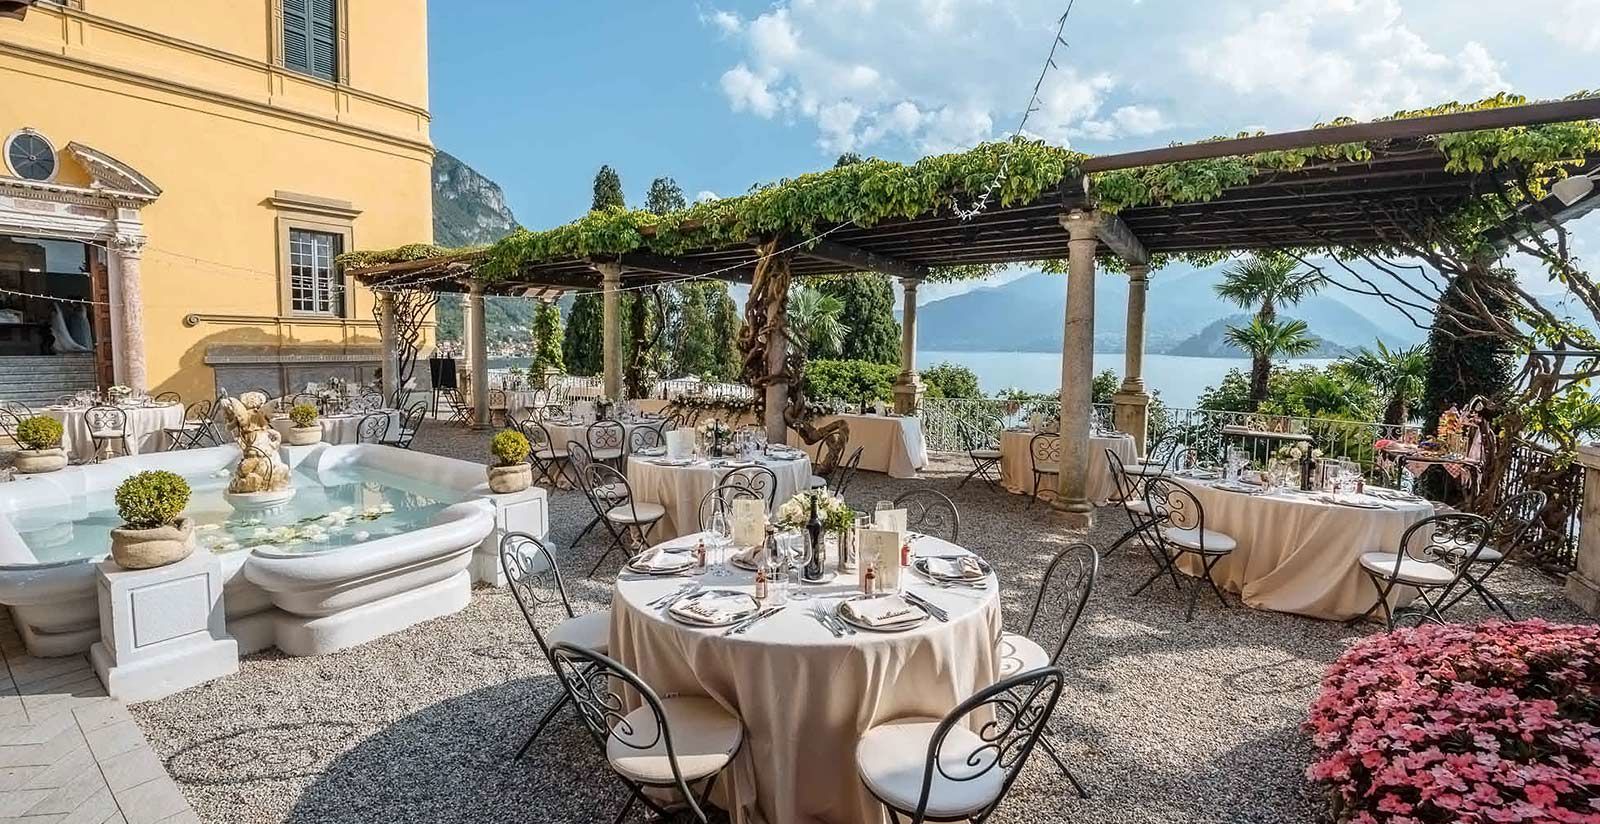 Hotel Villa Cipressi - 4-star hotel for a relaxing holiday in Varenna 4